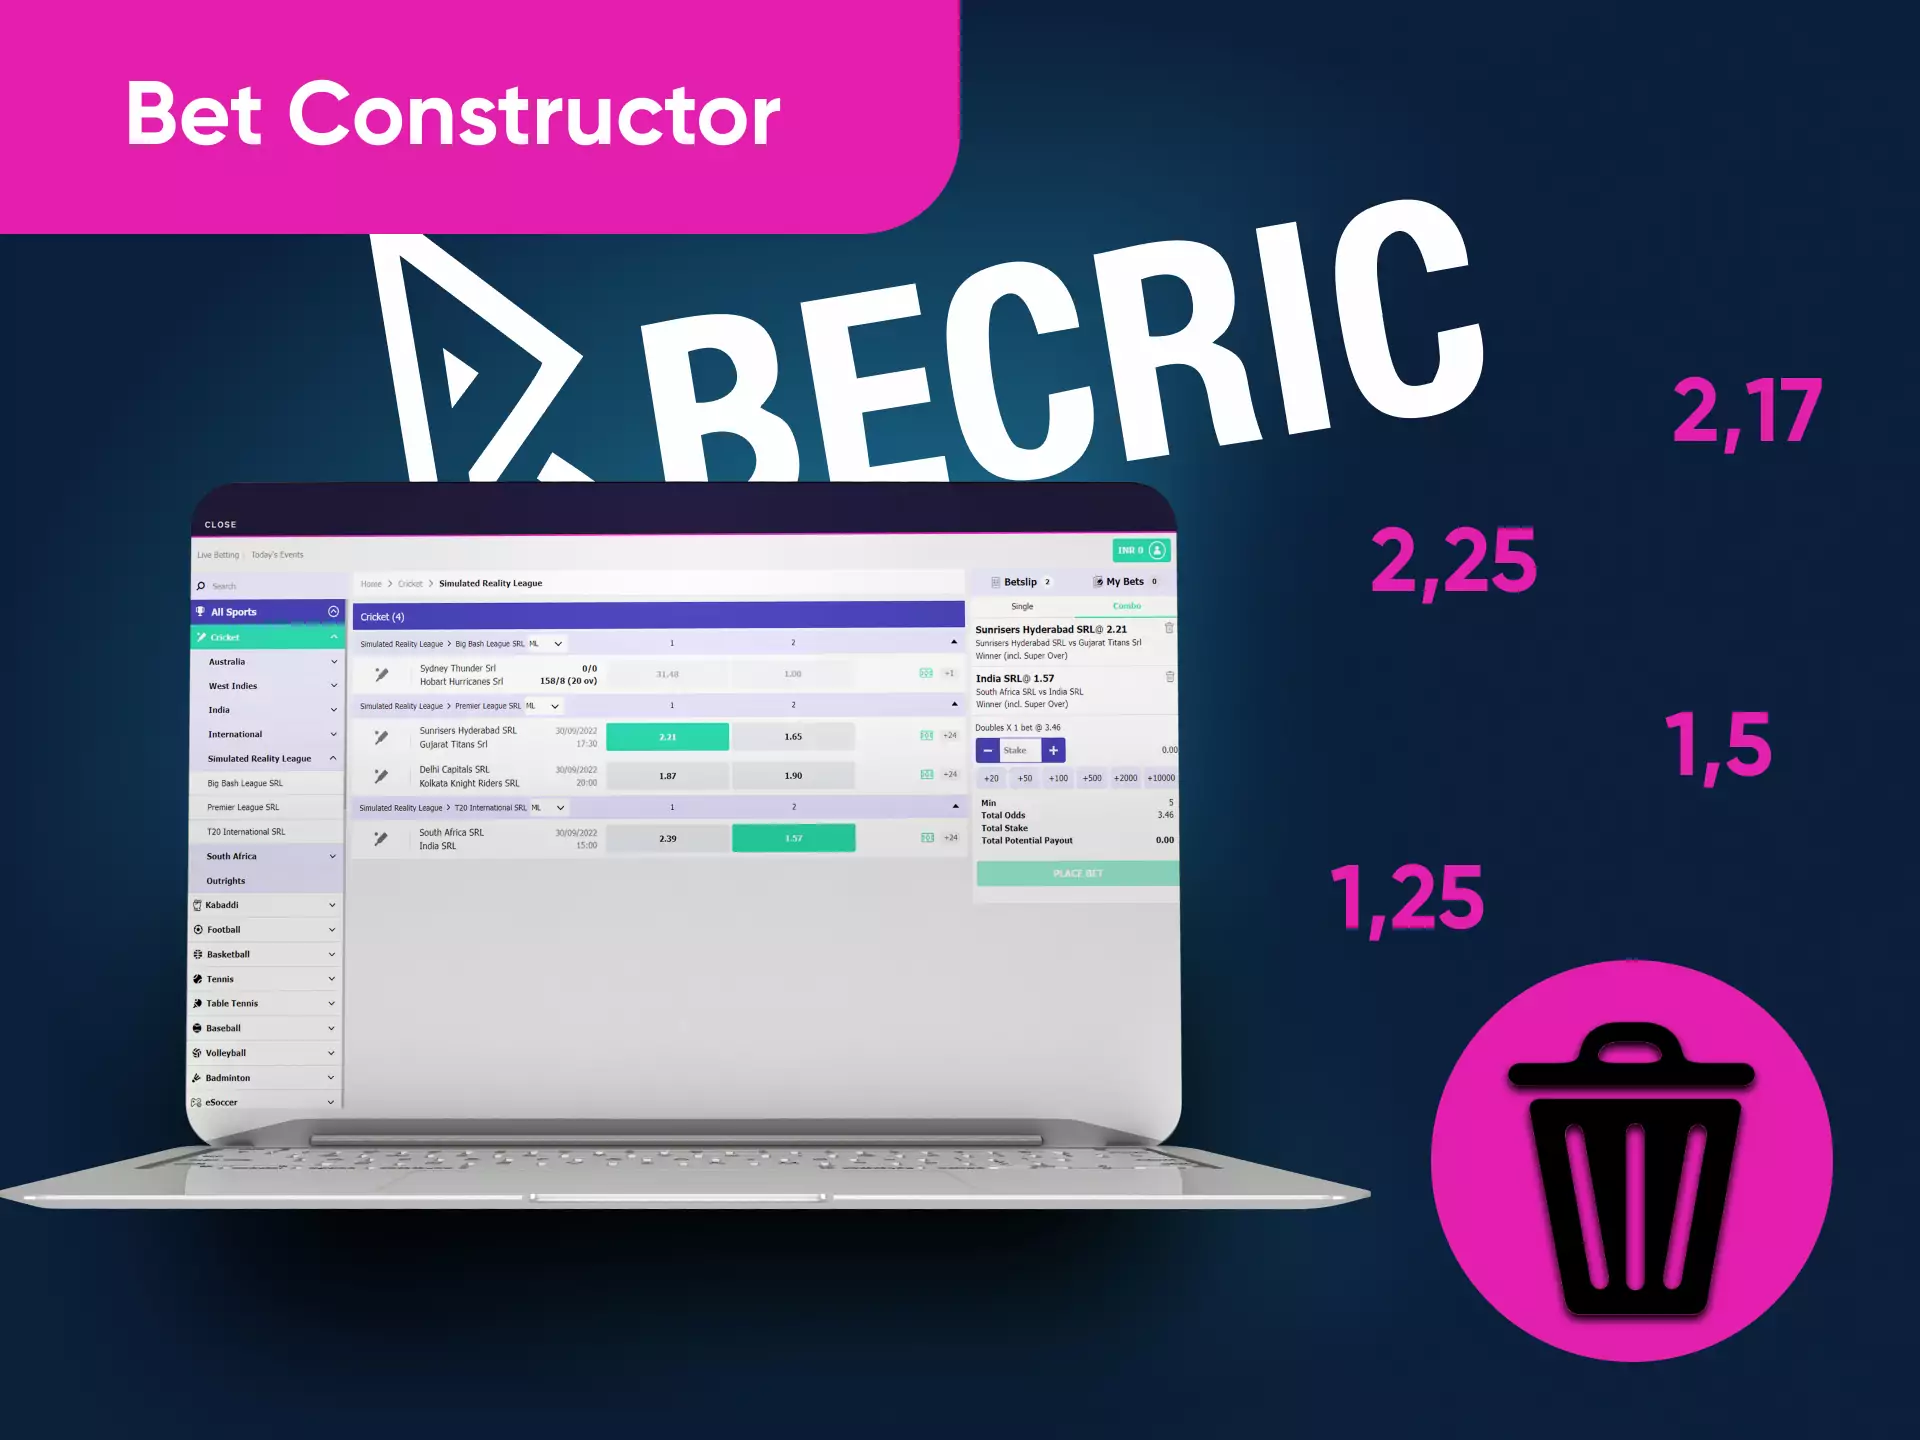 You can manage your bets in the constructor on Becric.